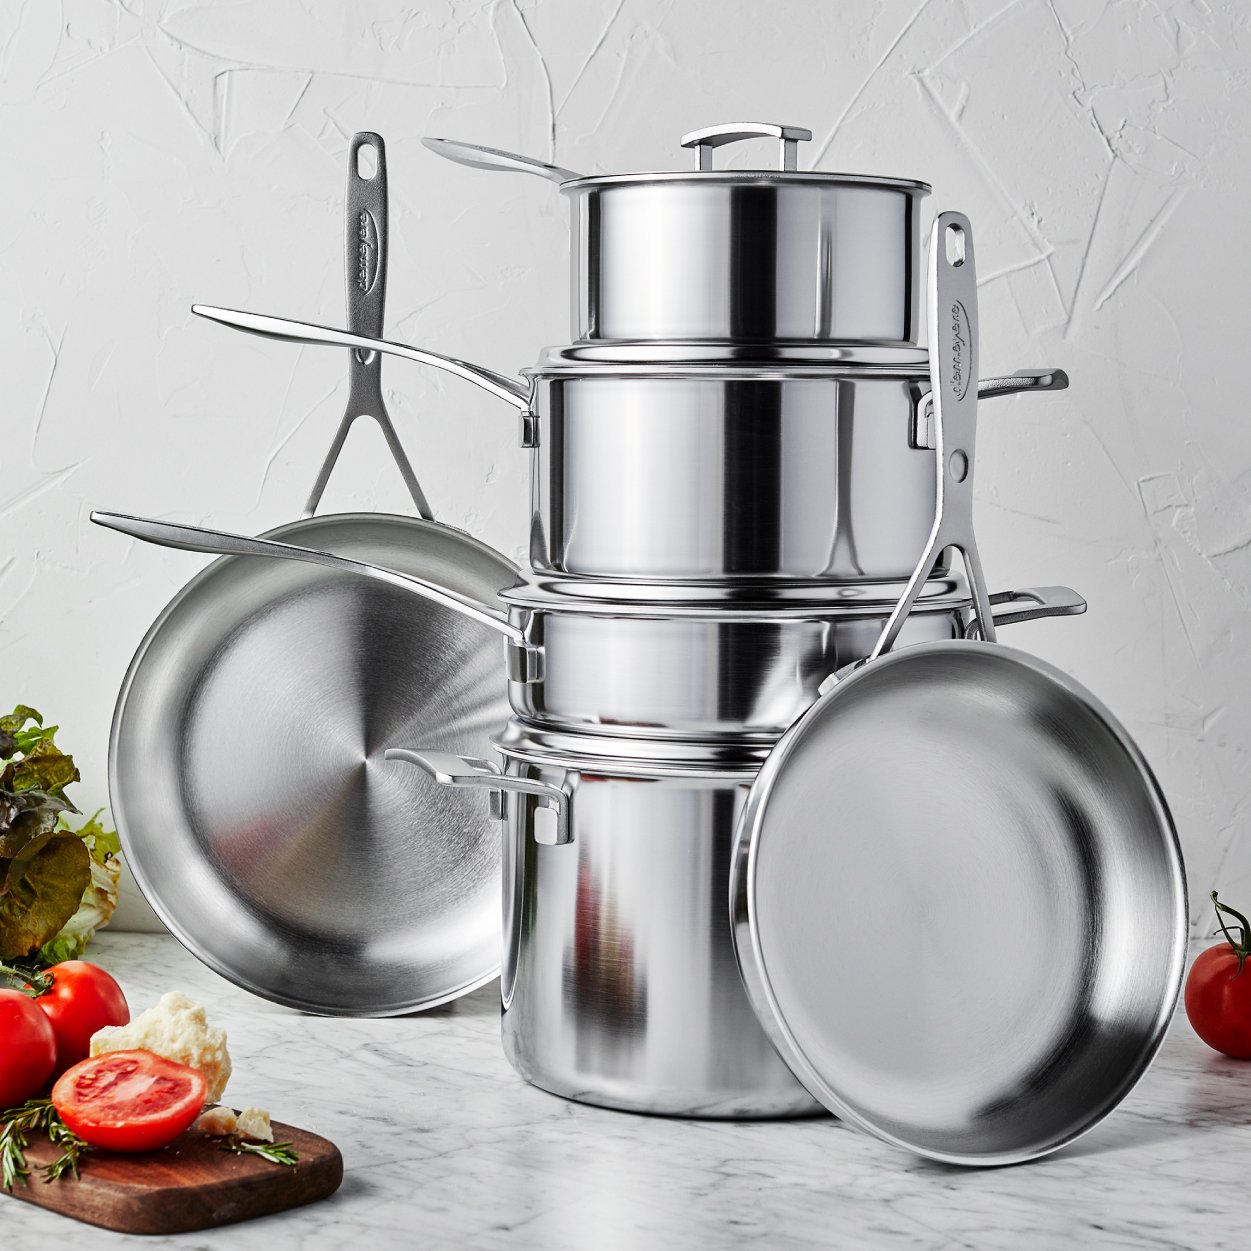 https://www.zwilling.com/on/demandware.static/-/Sites-zwilling-us-Library/default/dw6bbaf716/images/product-content/masonry-content/demeyere/cookware/industry/DE__Industry_Masonry_600-600_DE_Industry_1.jpg